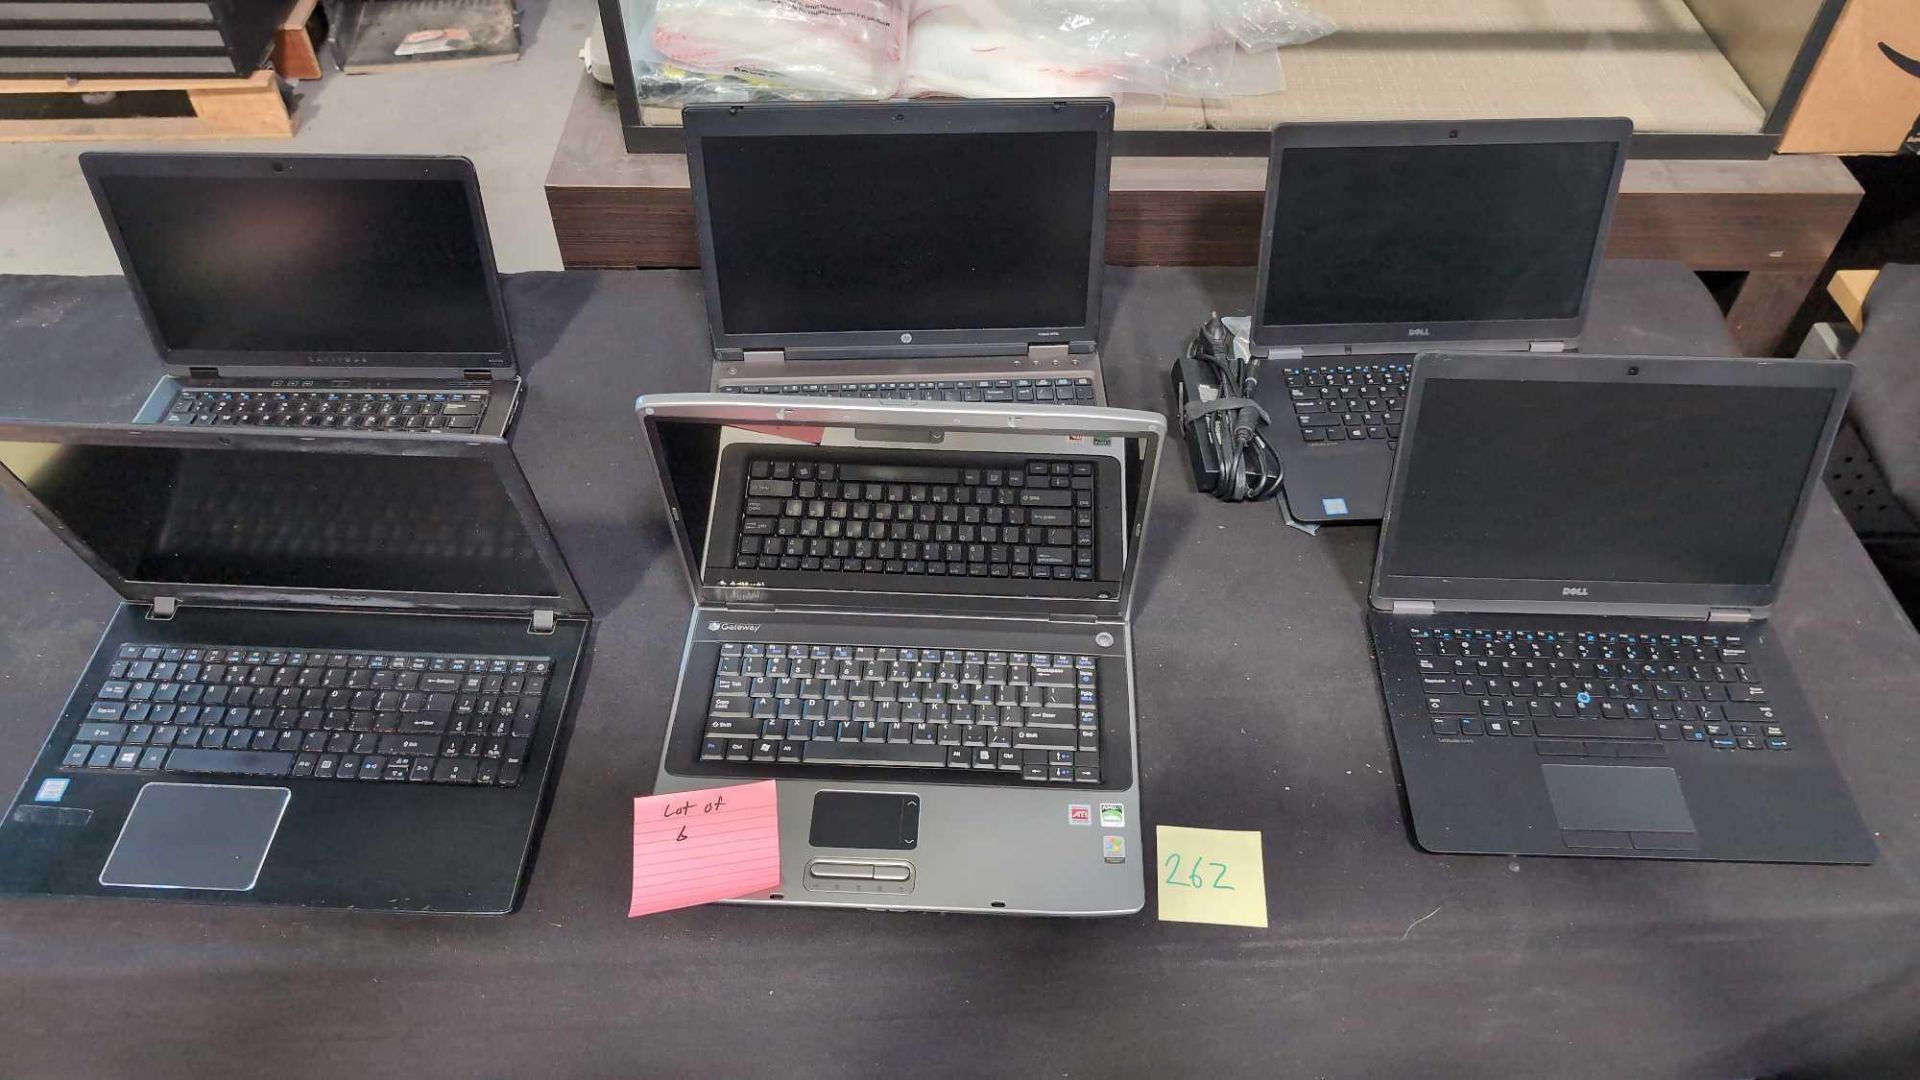 six laptops 3 l, 1 HP one Acer and one gateway